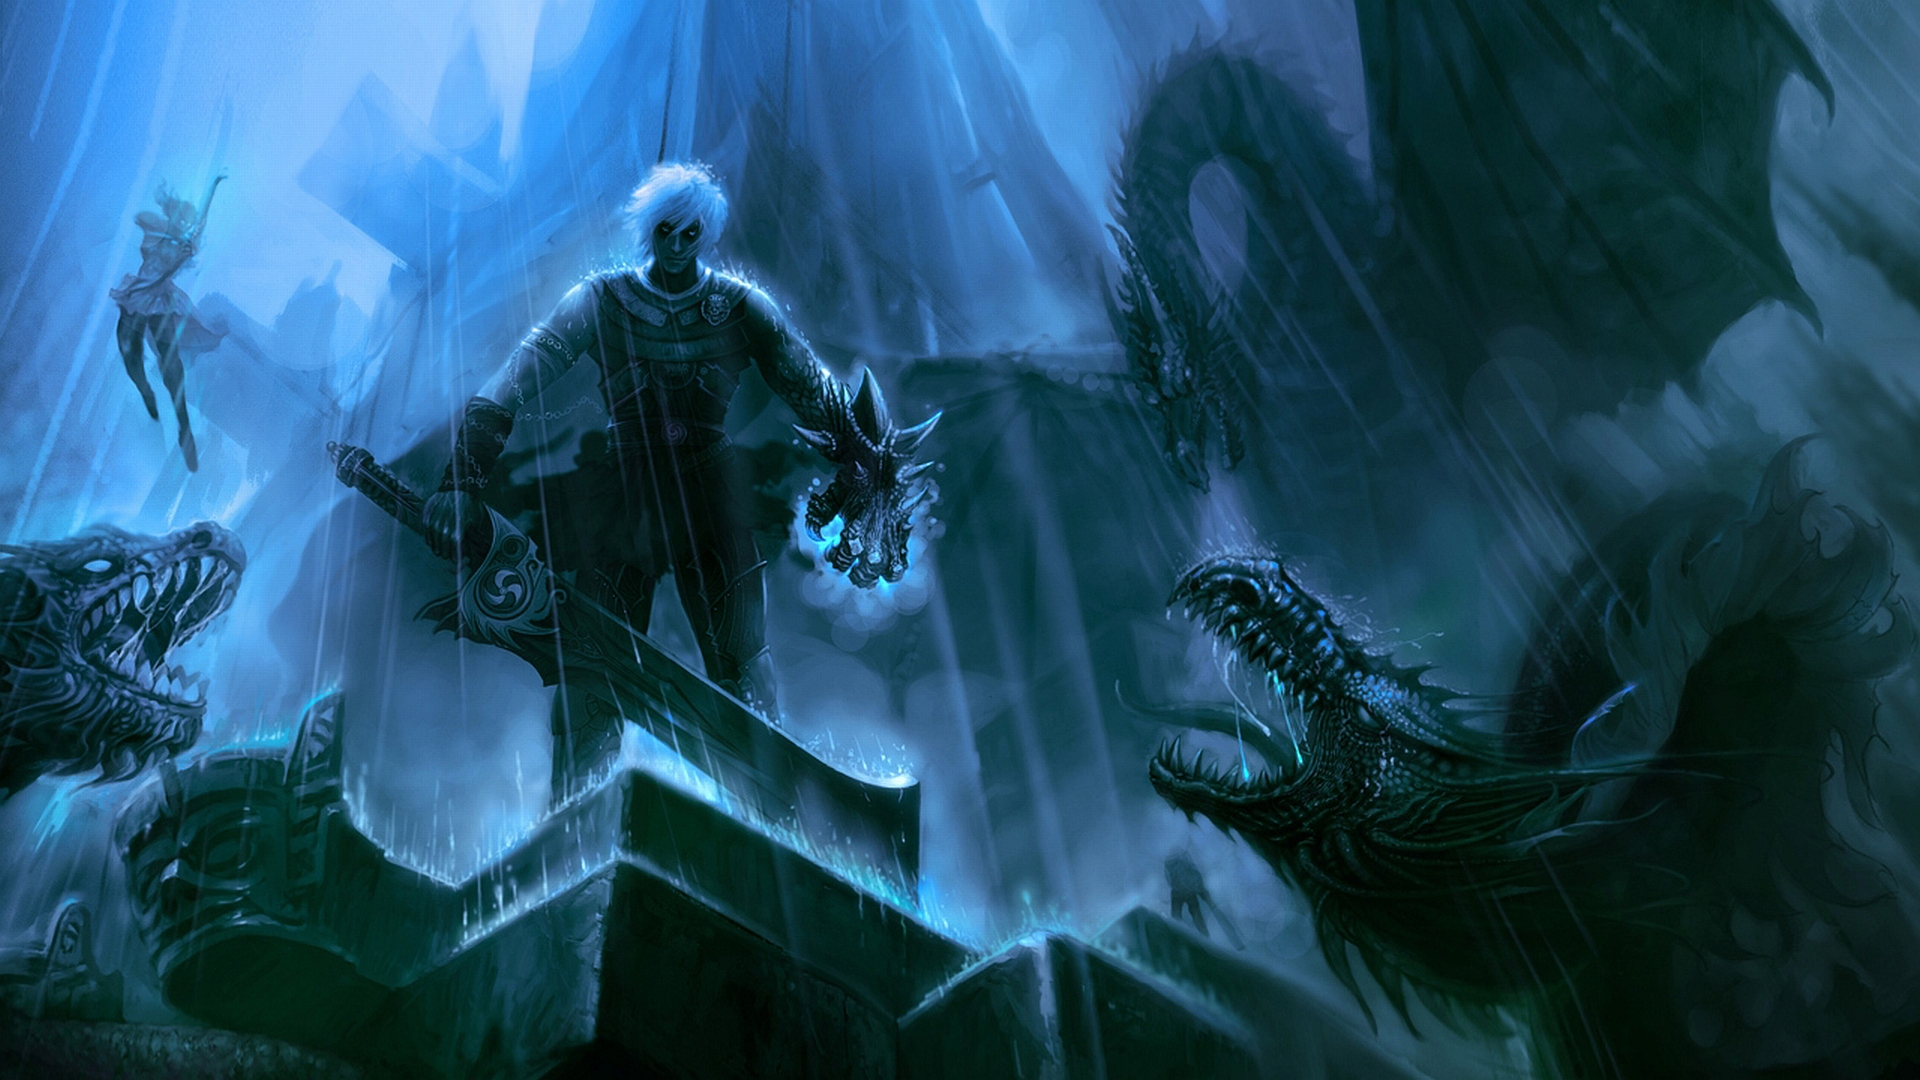 Powerful warrior emerges from the darkness in captivating desktop wallpaper.